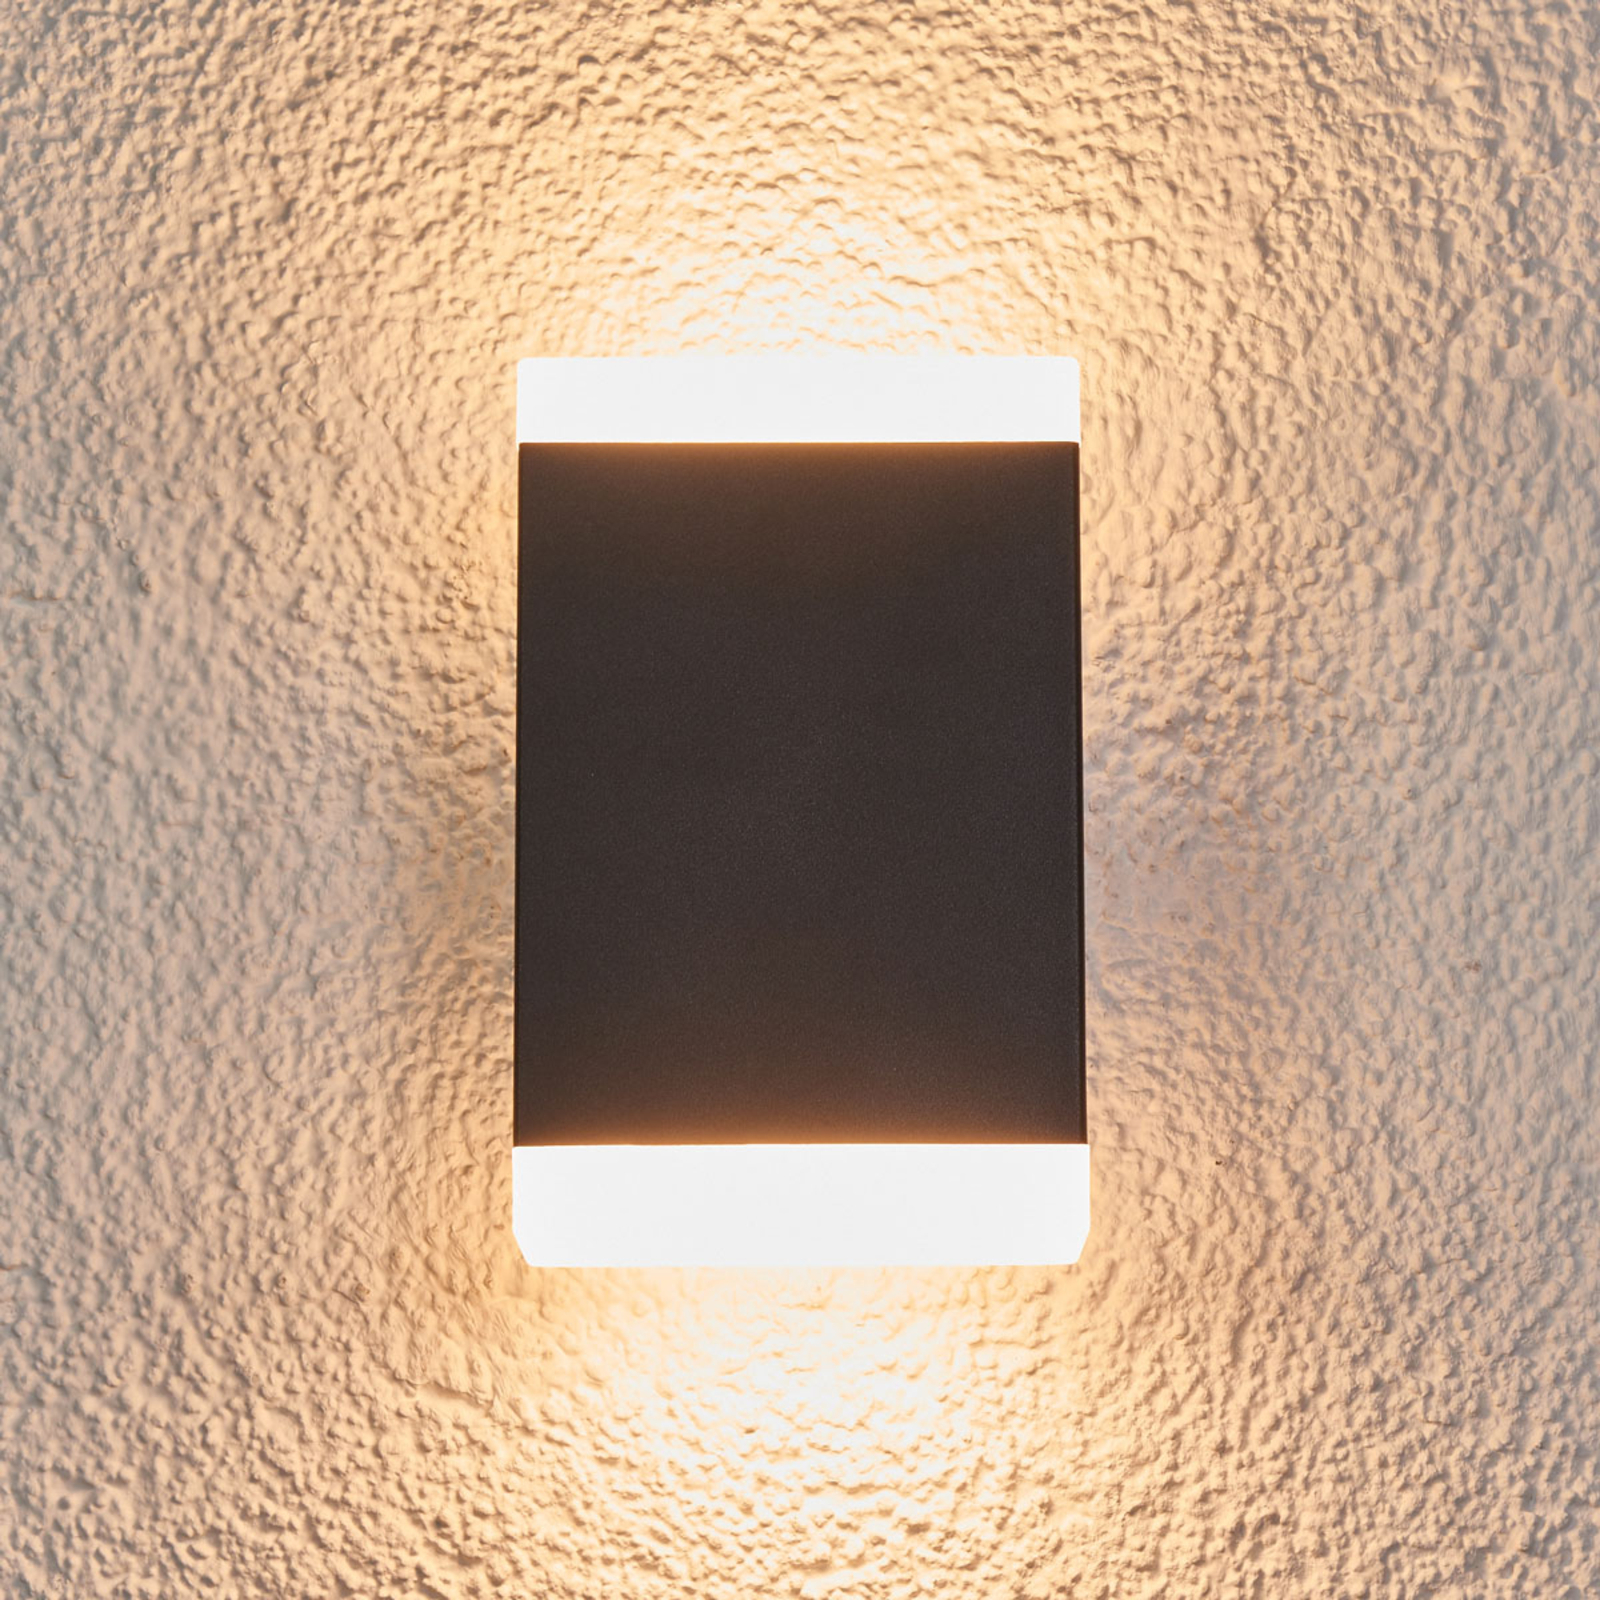 Timeless LED wall light Aya for outdoors - IP44